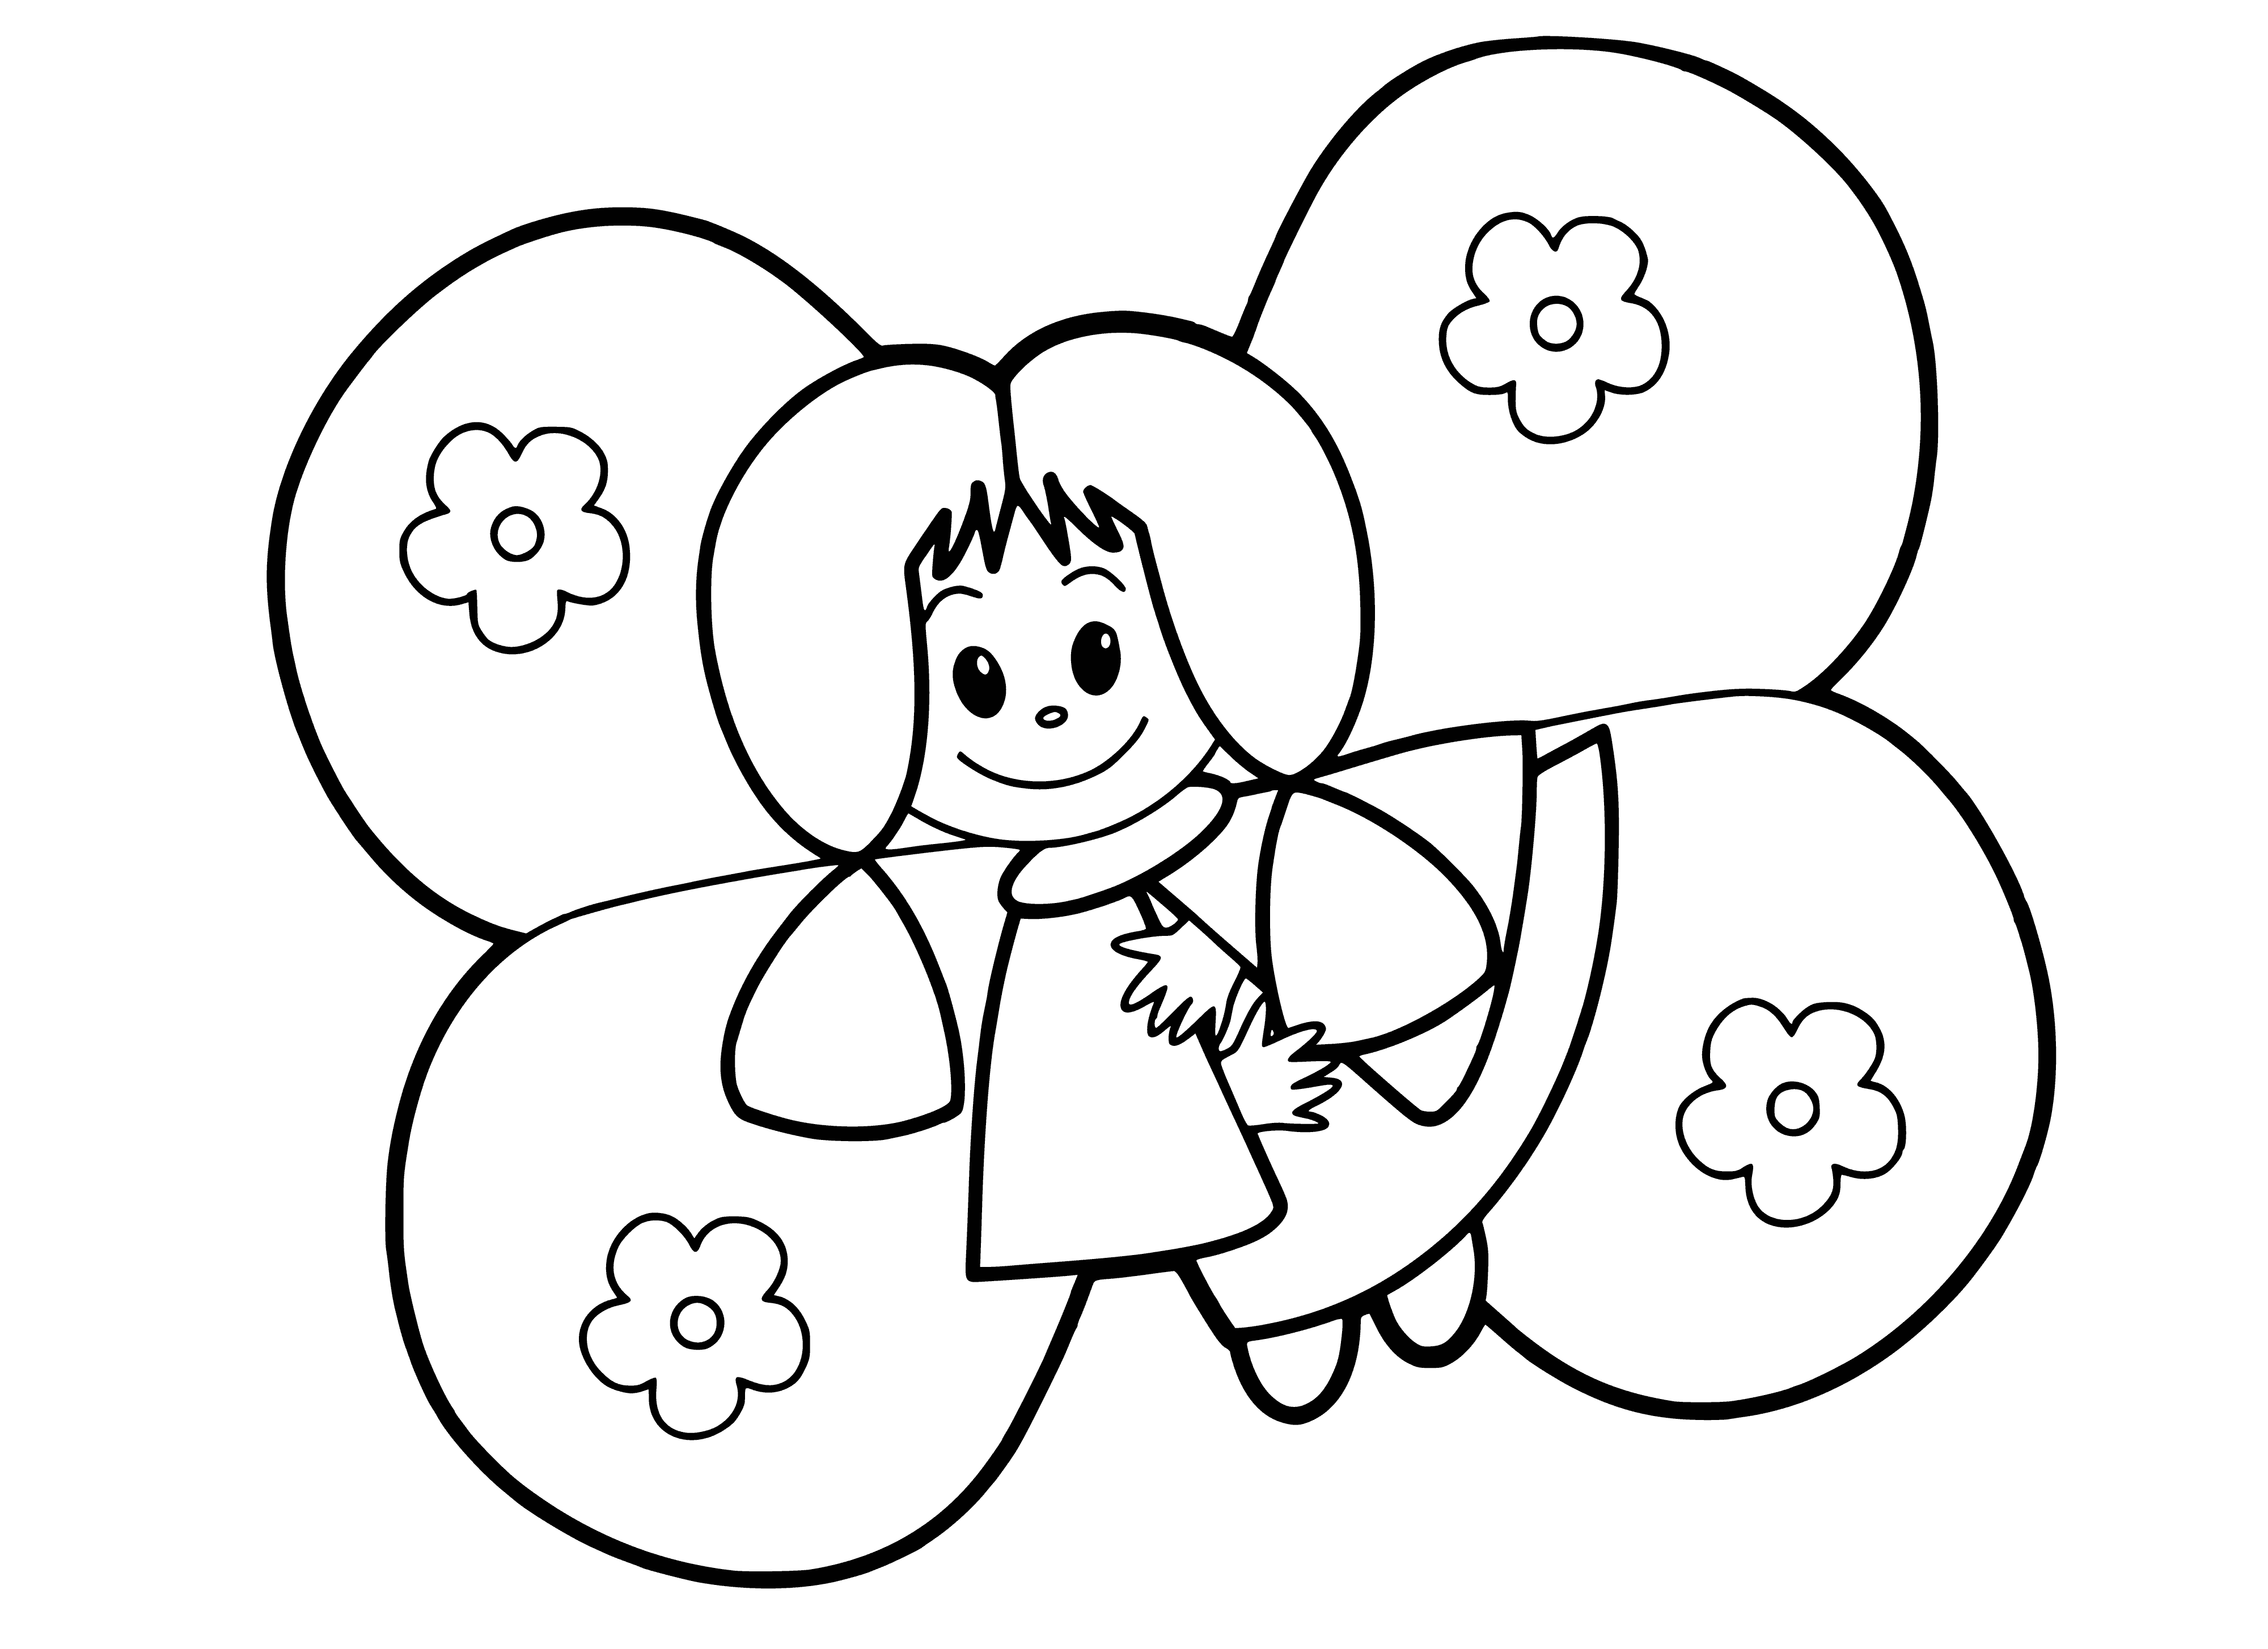 coloring page: Butterfly flies in the sky near red, yellow and purple flowers; it's blue and yellow with two wings.